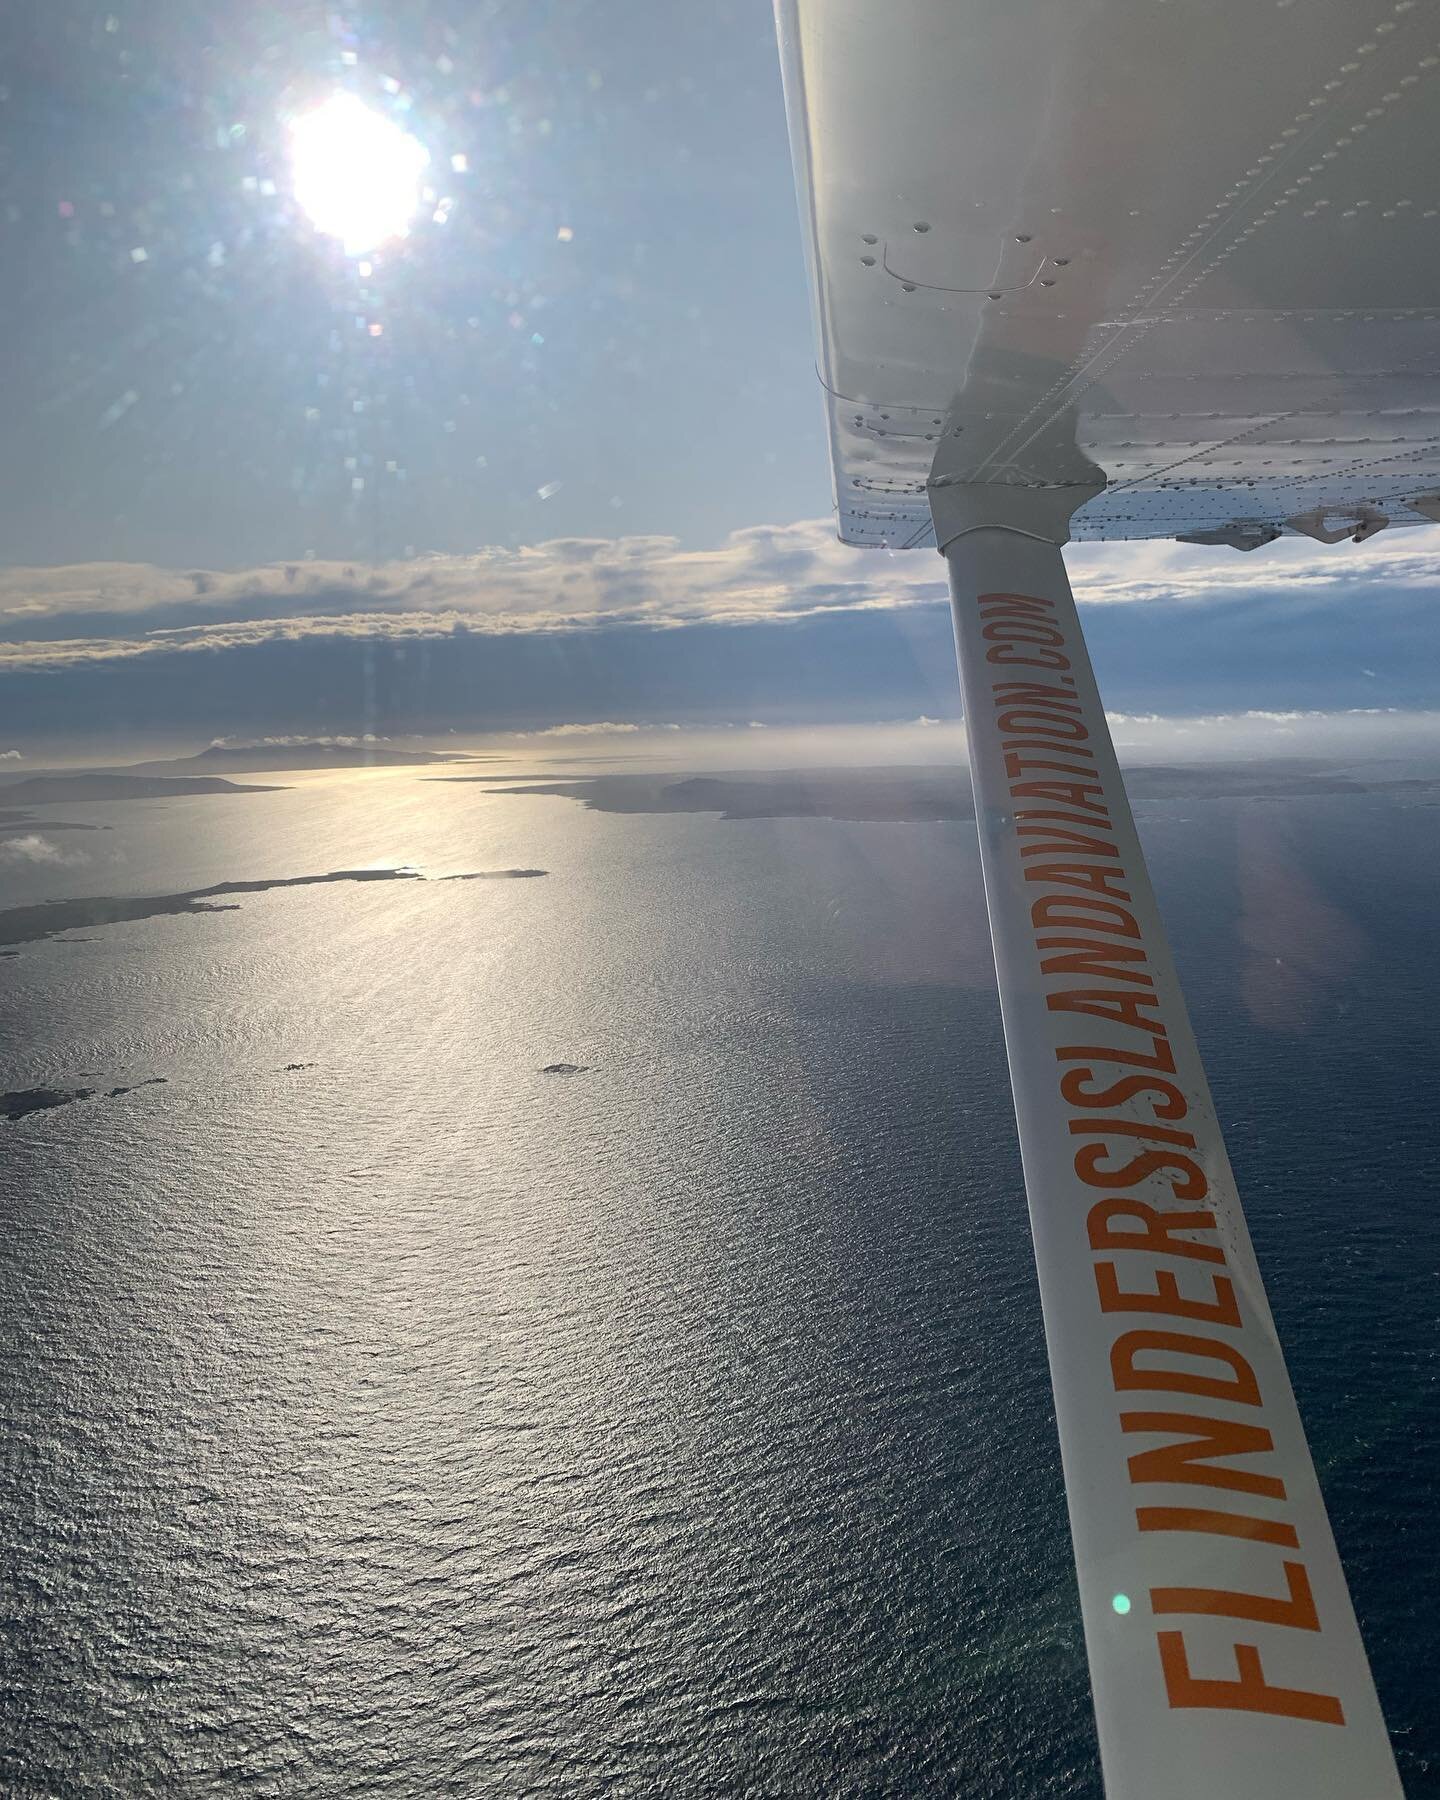 What better way to explore the Furneaux Islands than from above during Summer. Call us today to book a scenic flight just for you ☀️✈️✨

#aviation #flying #flindersislandaviation #tasmania #tas #discovertasmania #flyingintasmania #northeasttasmania #